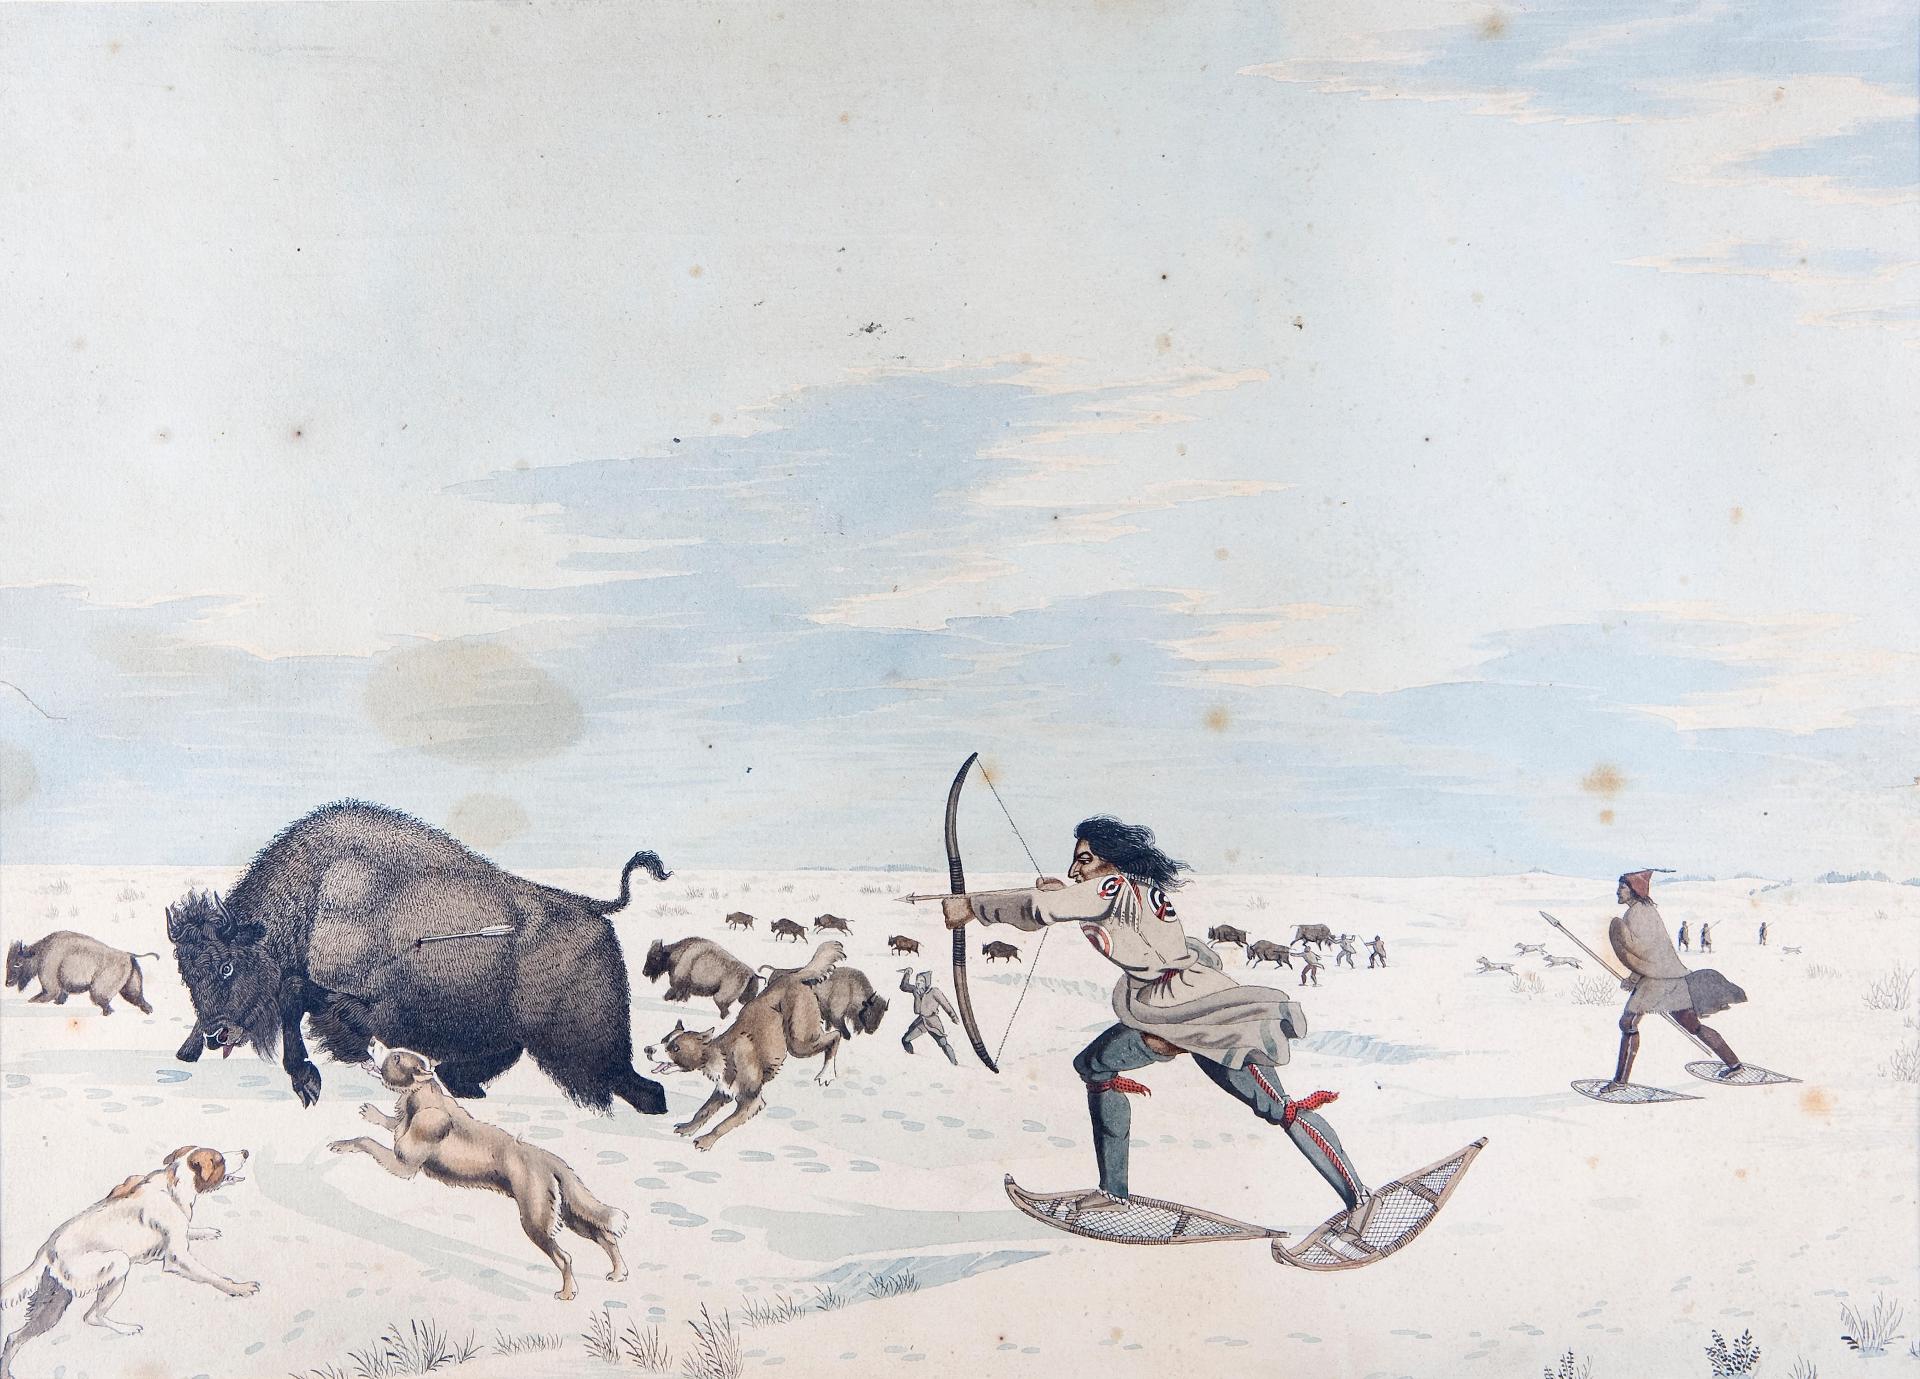 Peter Rindisbacher (1806-1834) - Blackfoot hunting in snow shoes